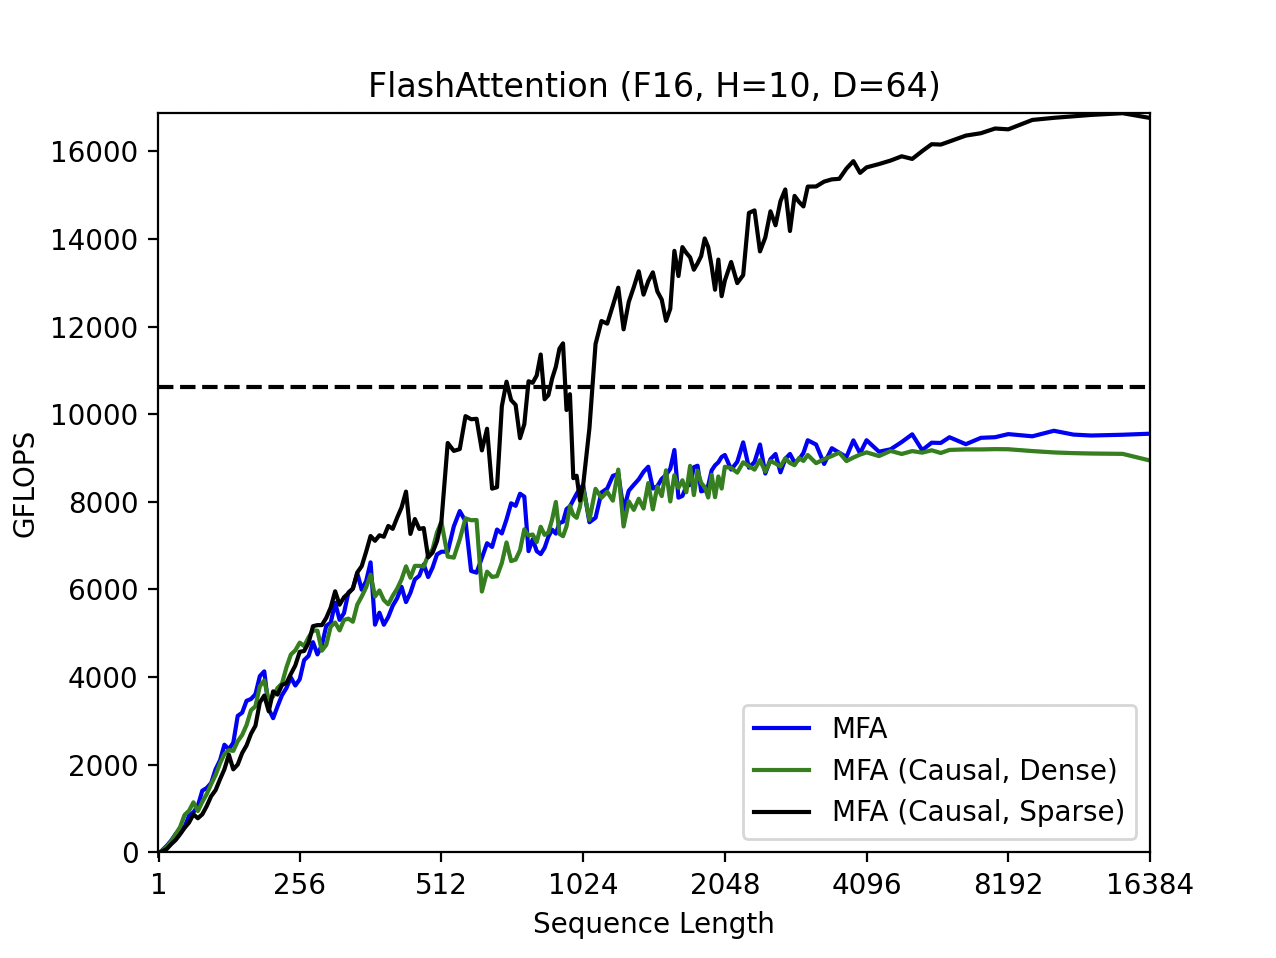 FlashAttention (F16, H=10, D=64)